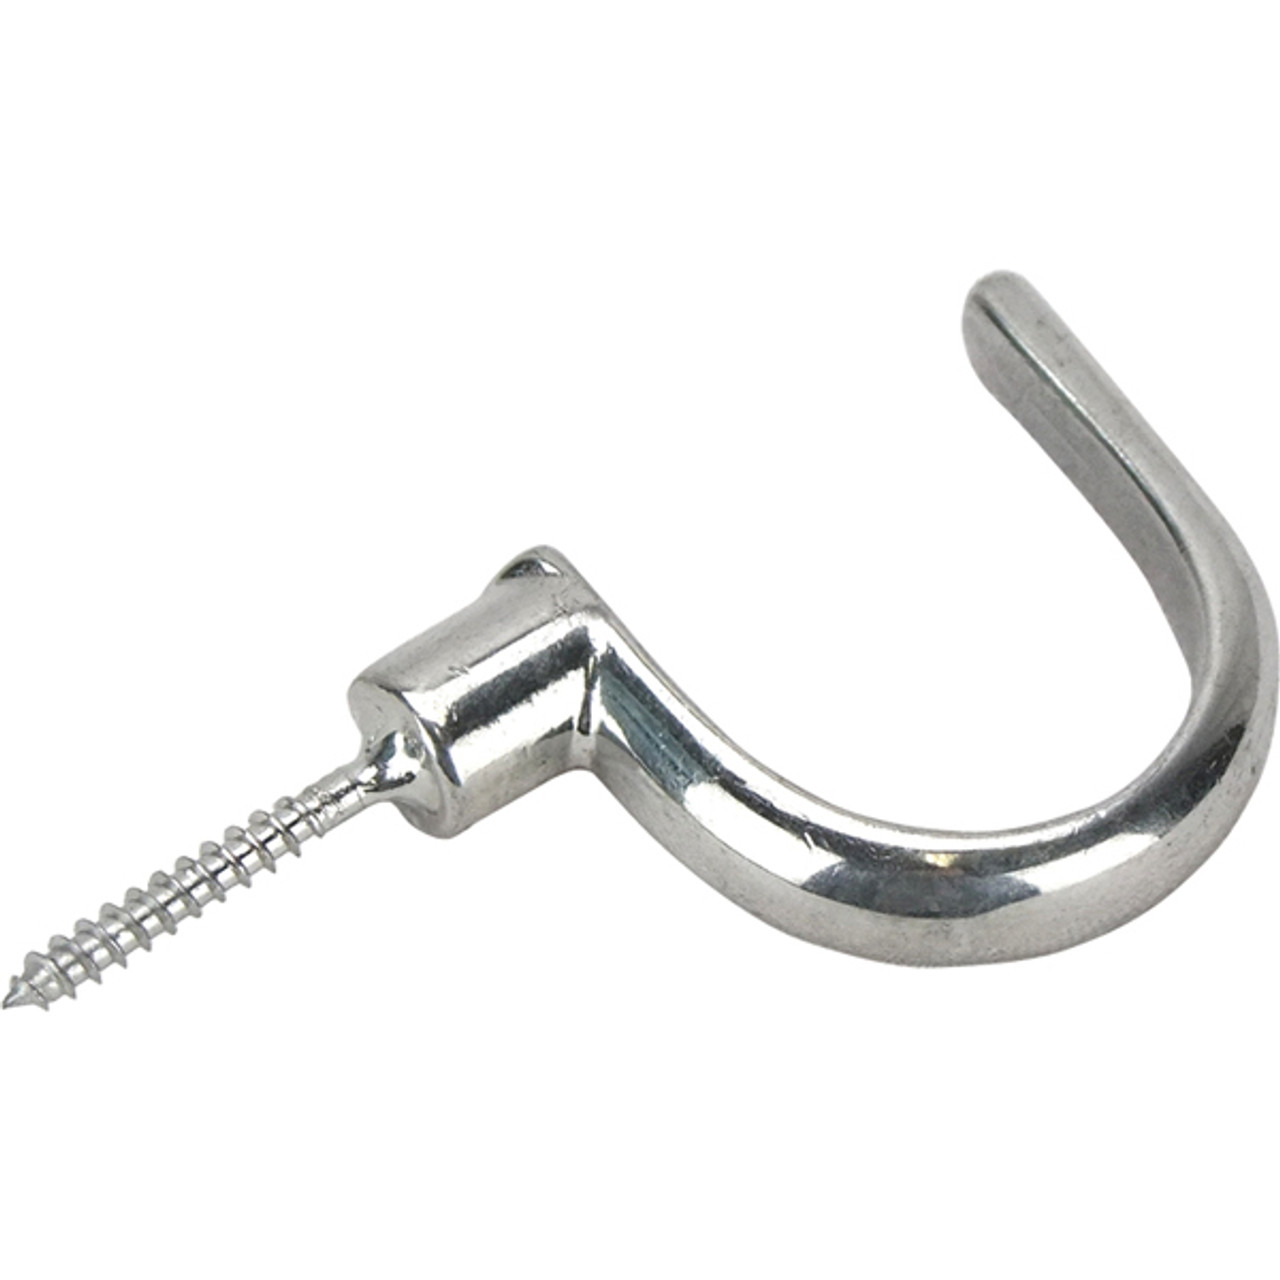 https://cdn11.bigcommerce.com/s-ydm181c/images/stencil/1280x1280/products/2731/10229/stainless_steel_screw_hook_316_grade_1__10625.1461018650.jpg?c=2